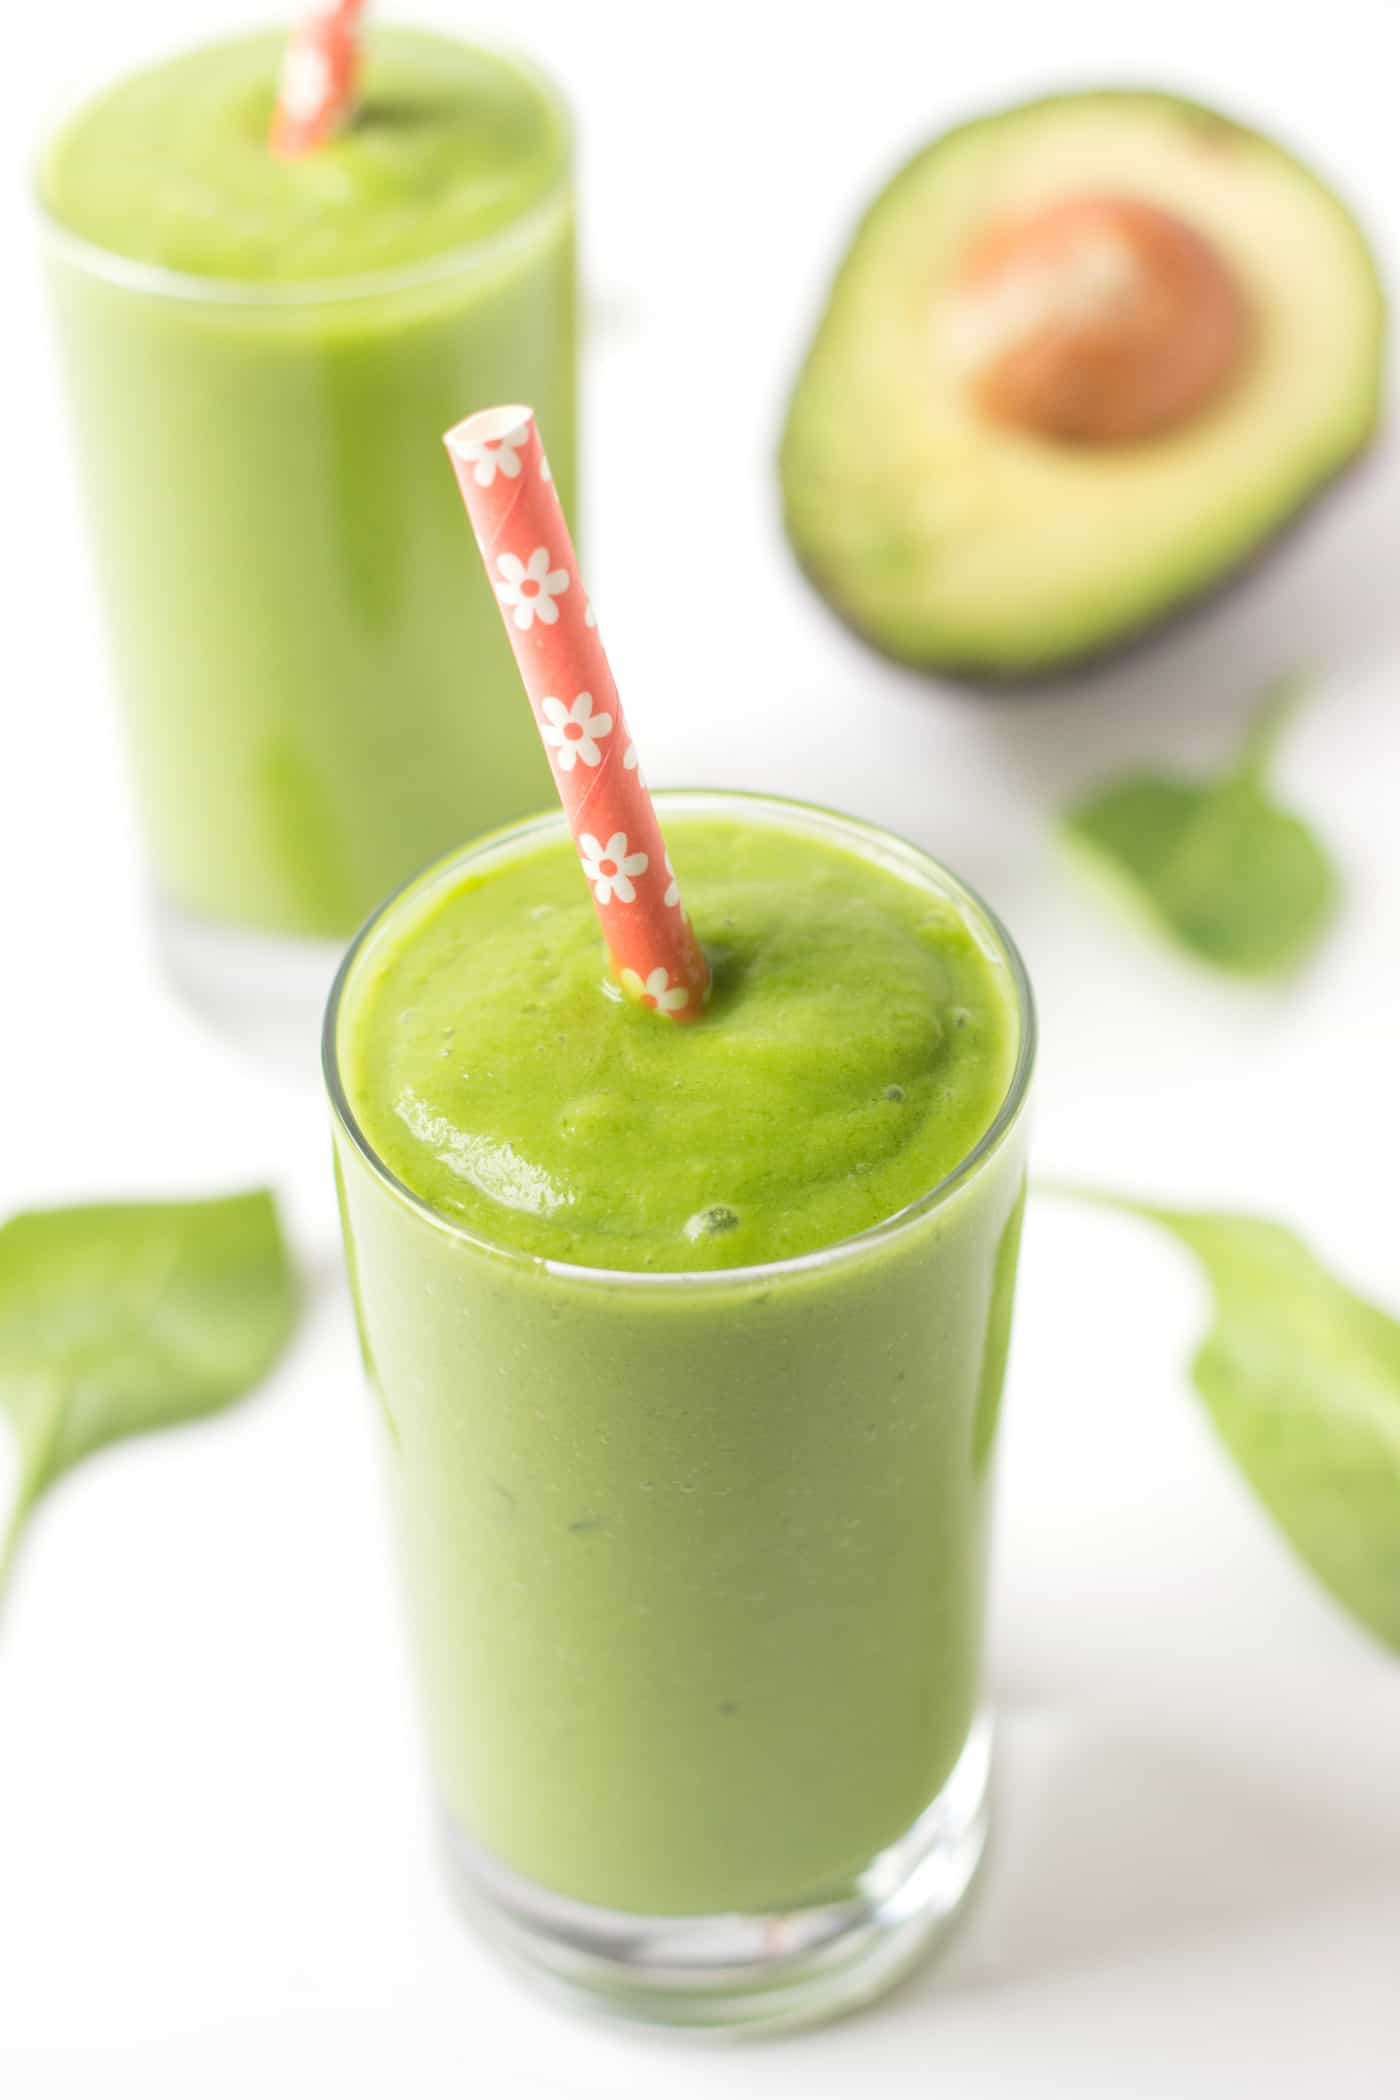 Alyssa's Favorite Green Smoothie with greens, avocado and SO much goodness!